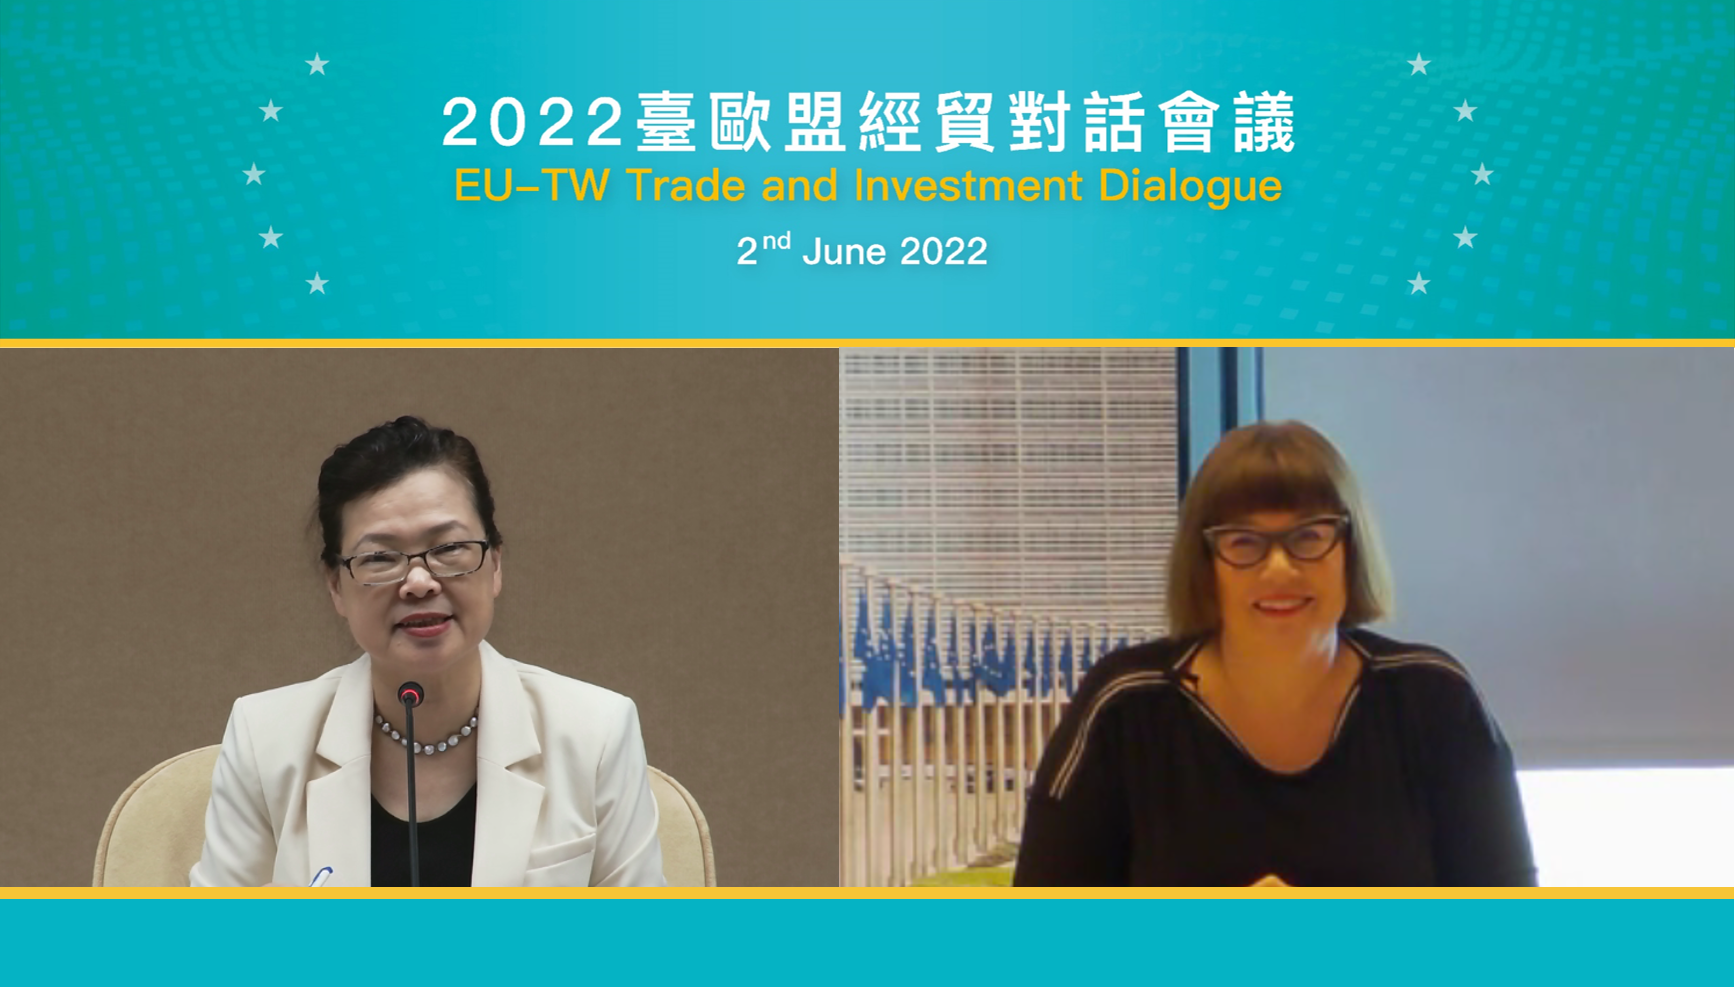 Mei-Hua Wang, Minister of Economic Affairs and Sabine Weyand, Director-General of DG Trade, co-chaired the “EU-Taiwan Trade and Investment Dialogue ”.